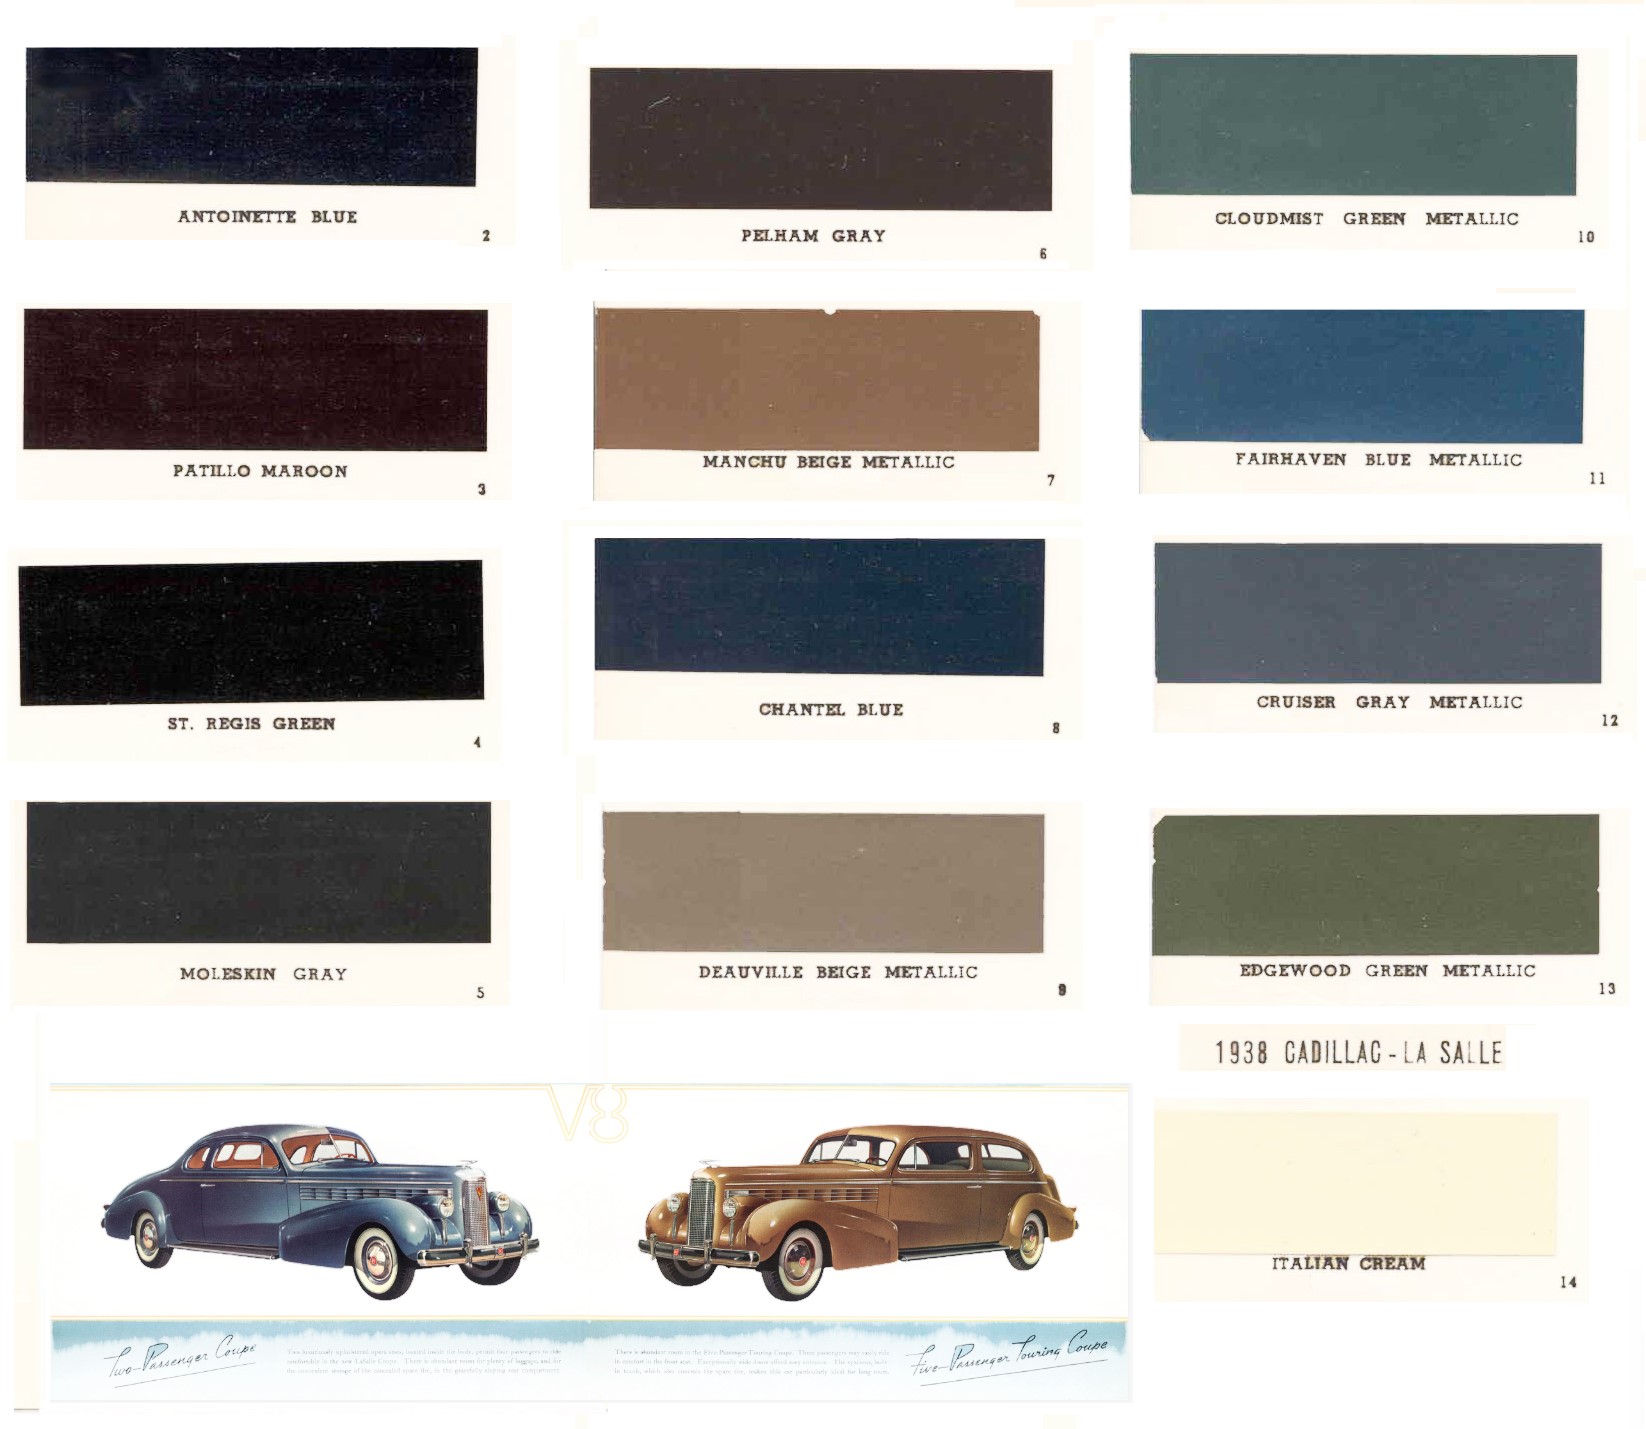 Colors used on LaSalle and Cadillac Vehicles in 1938